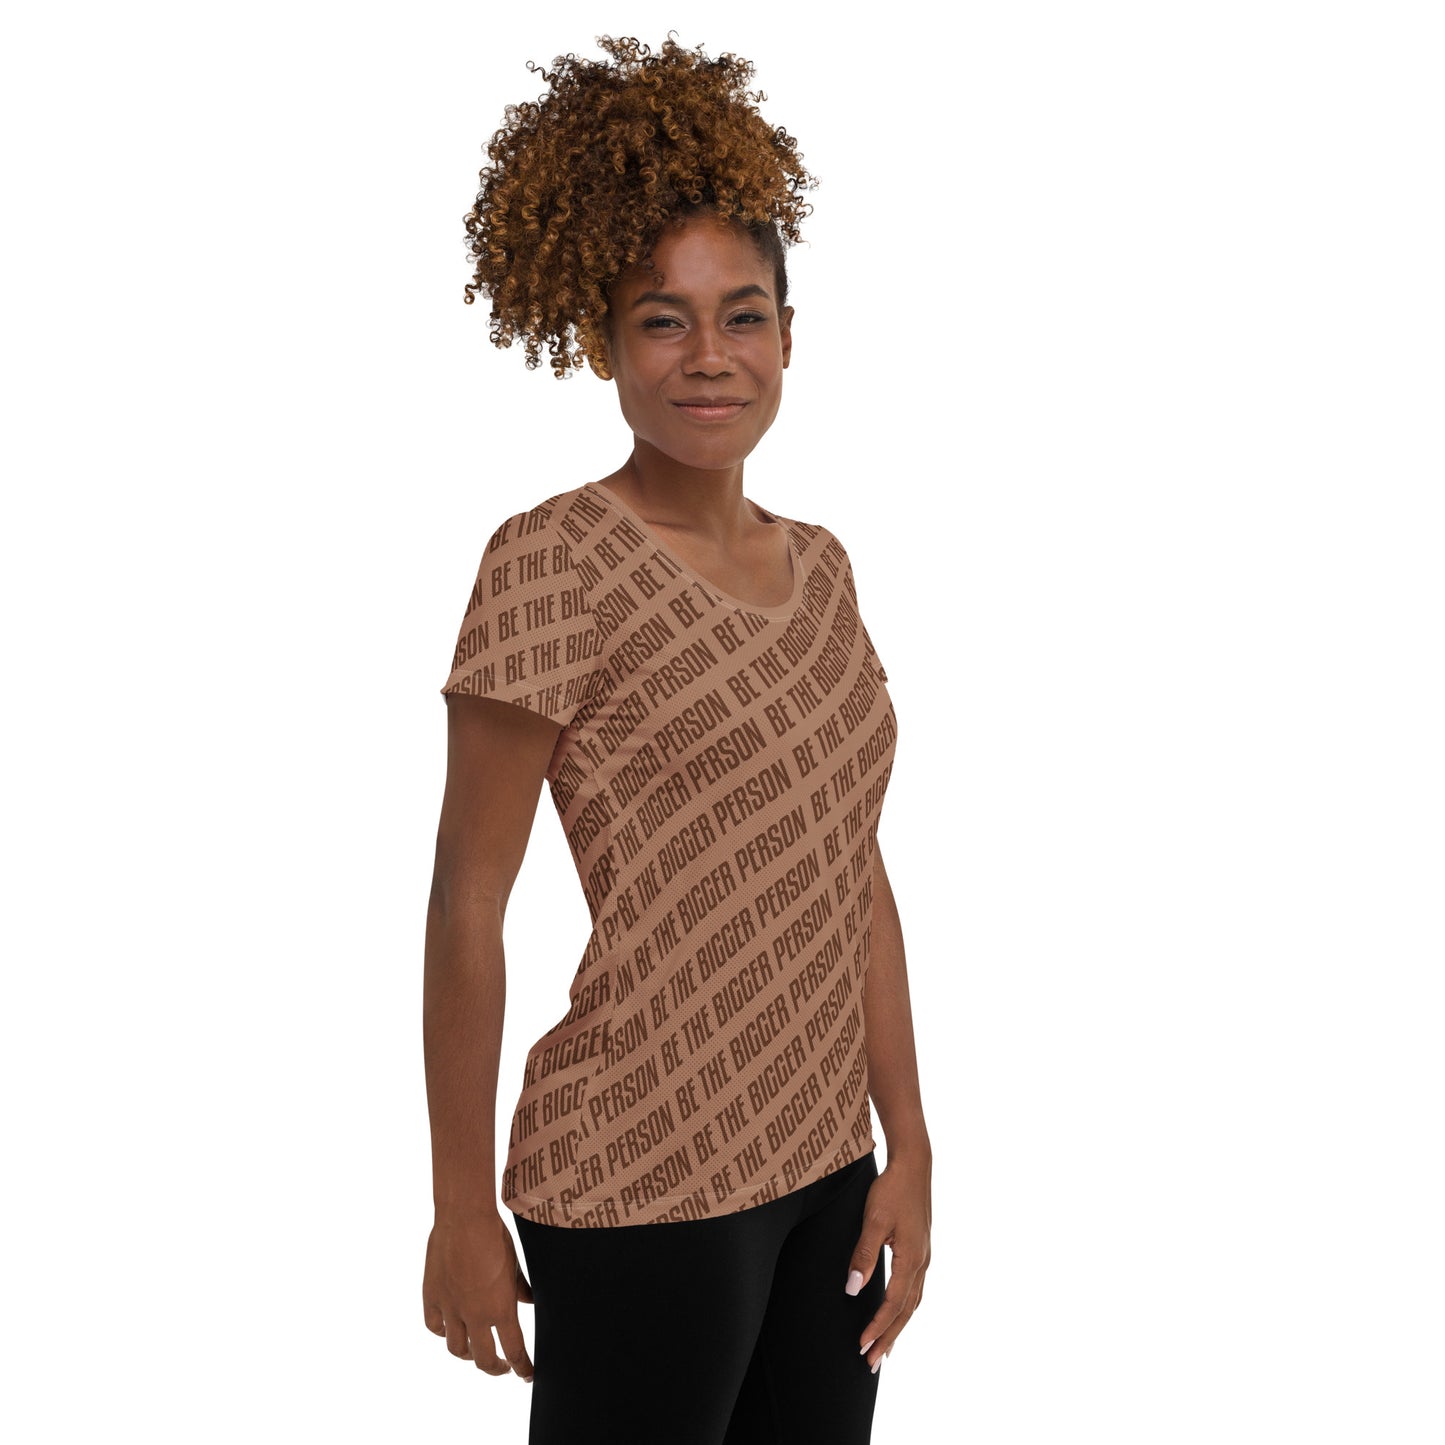 BROWN NOSER - Women's Athletic T-shirt